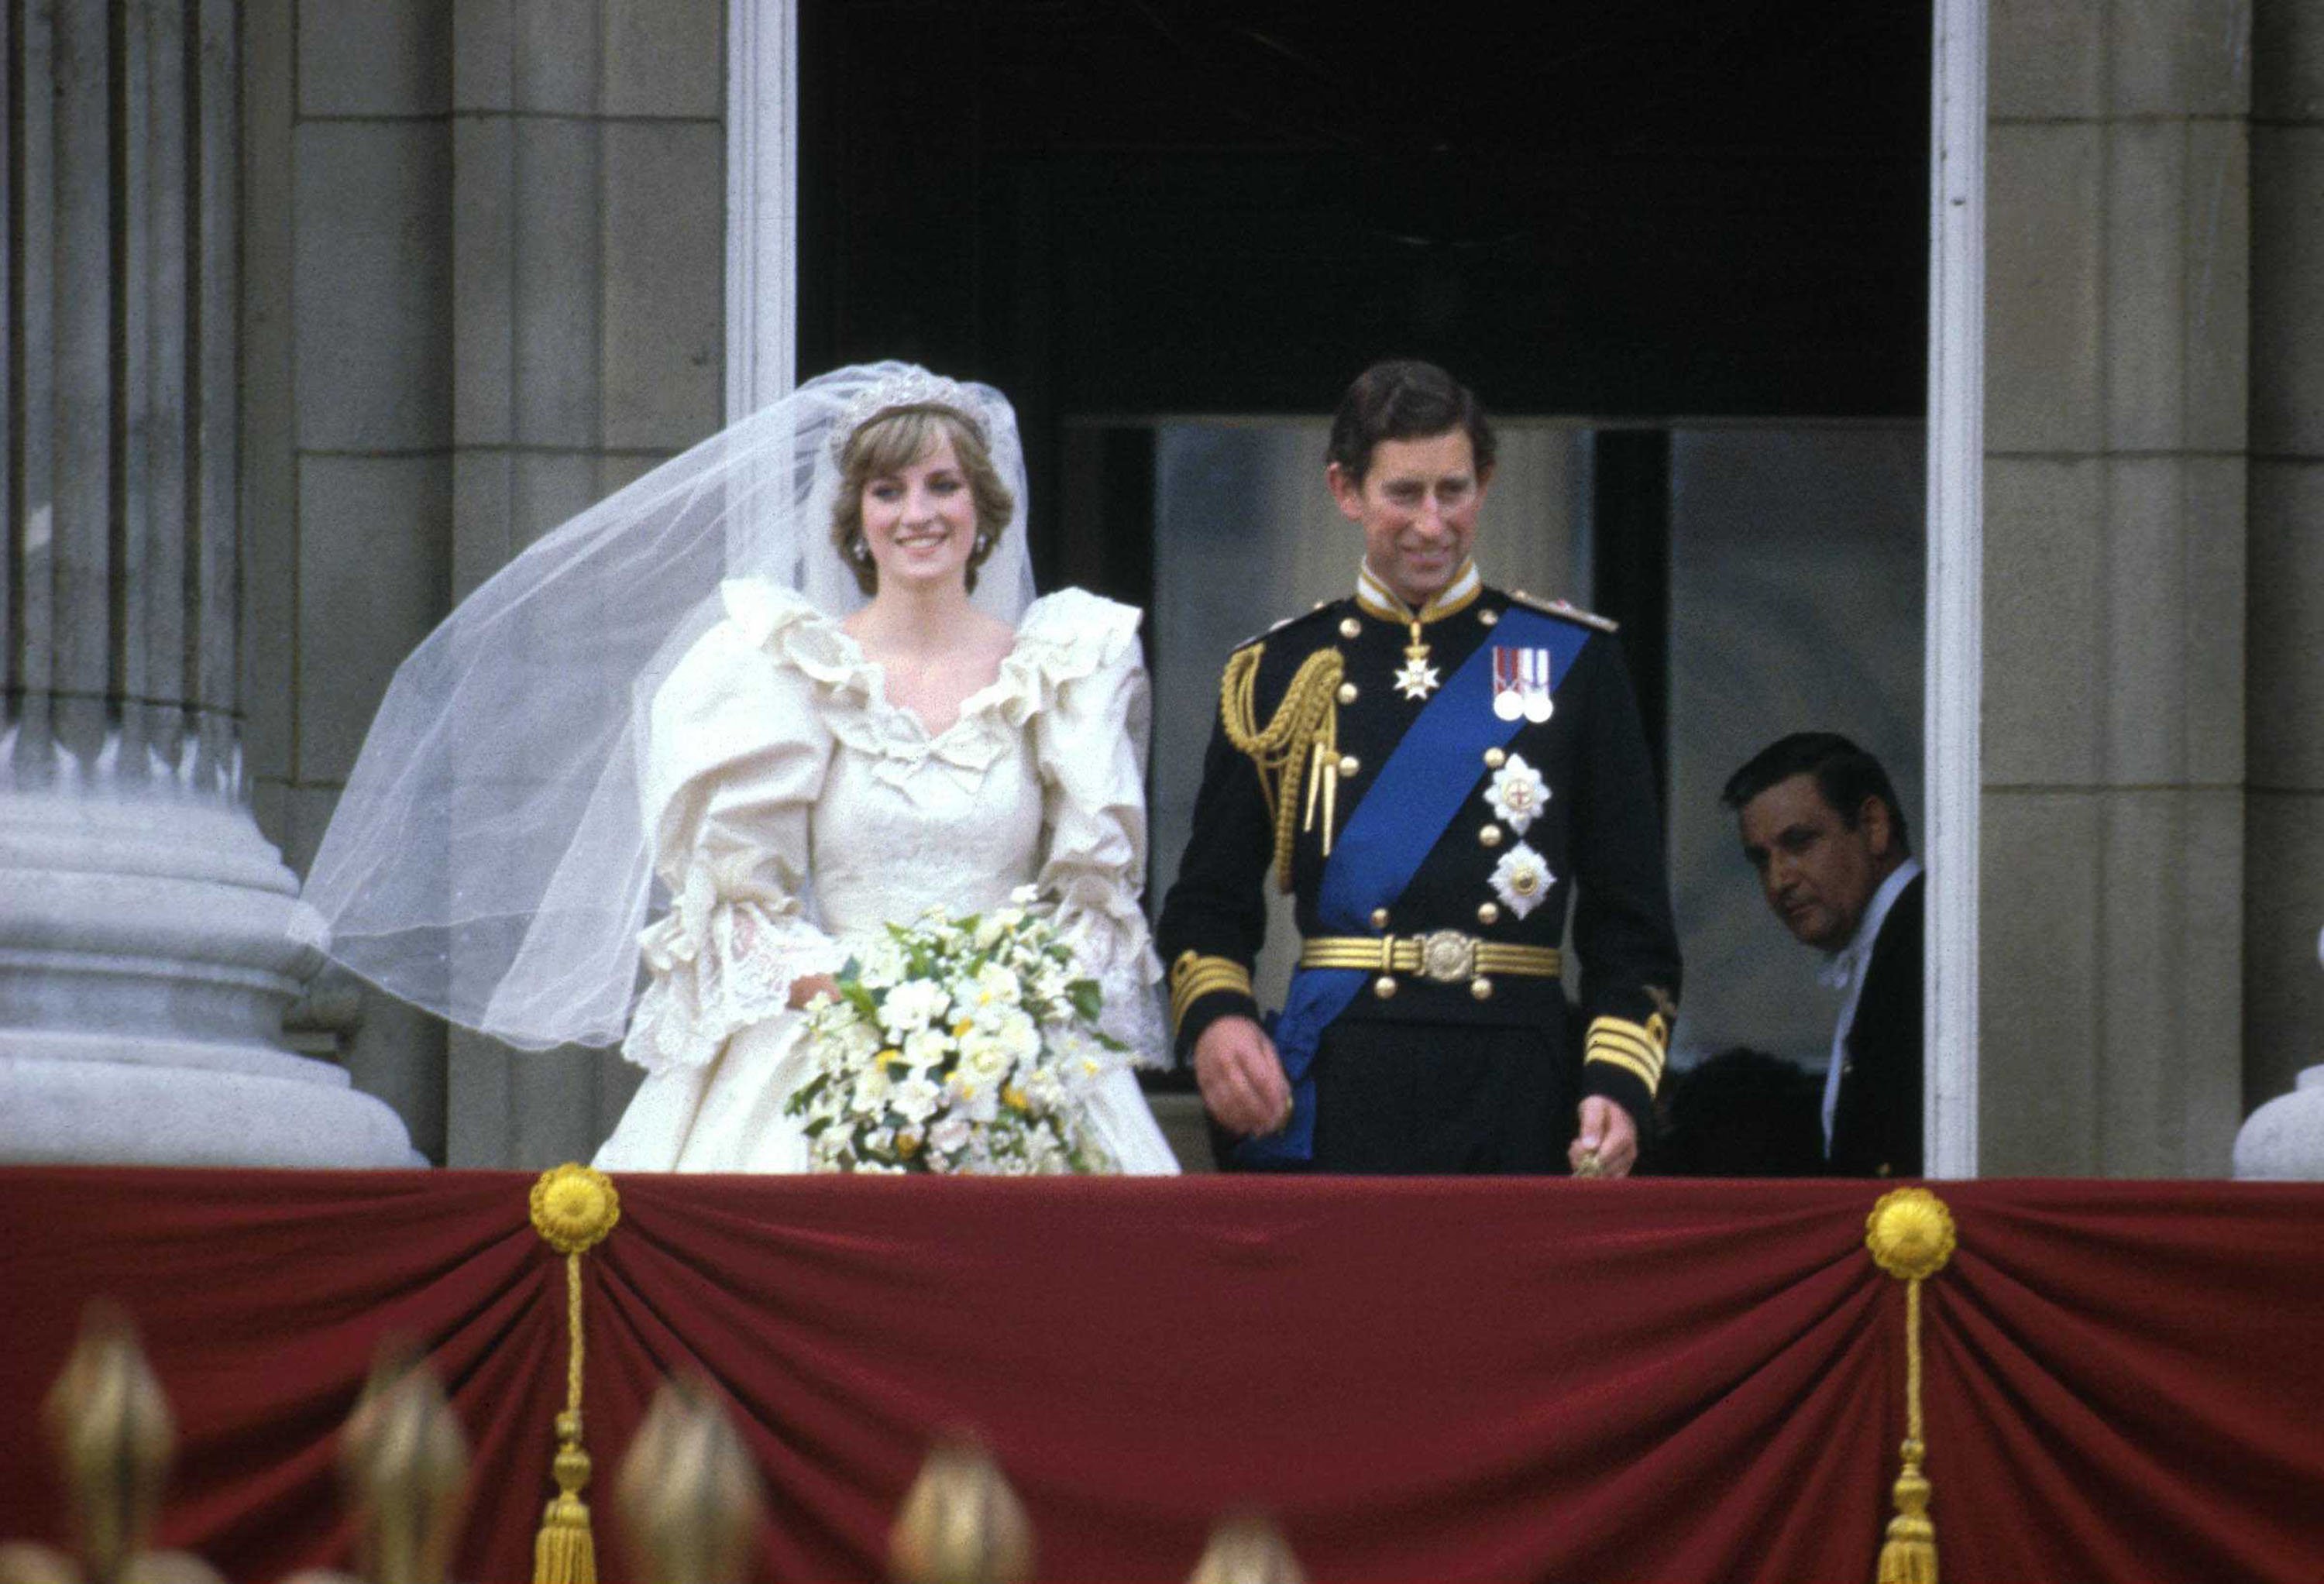 Prince Charles & Princess Diana on the balcony of Buckingham Palace after their wedding ceremony at St. Paul's Cathedral, London, England, July 29, 1981. | Source: Getty Images